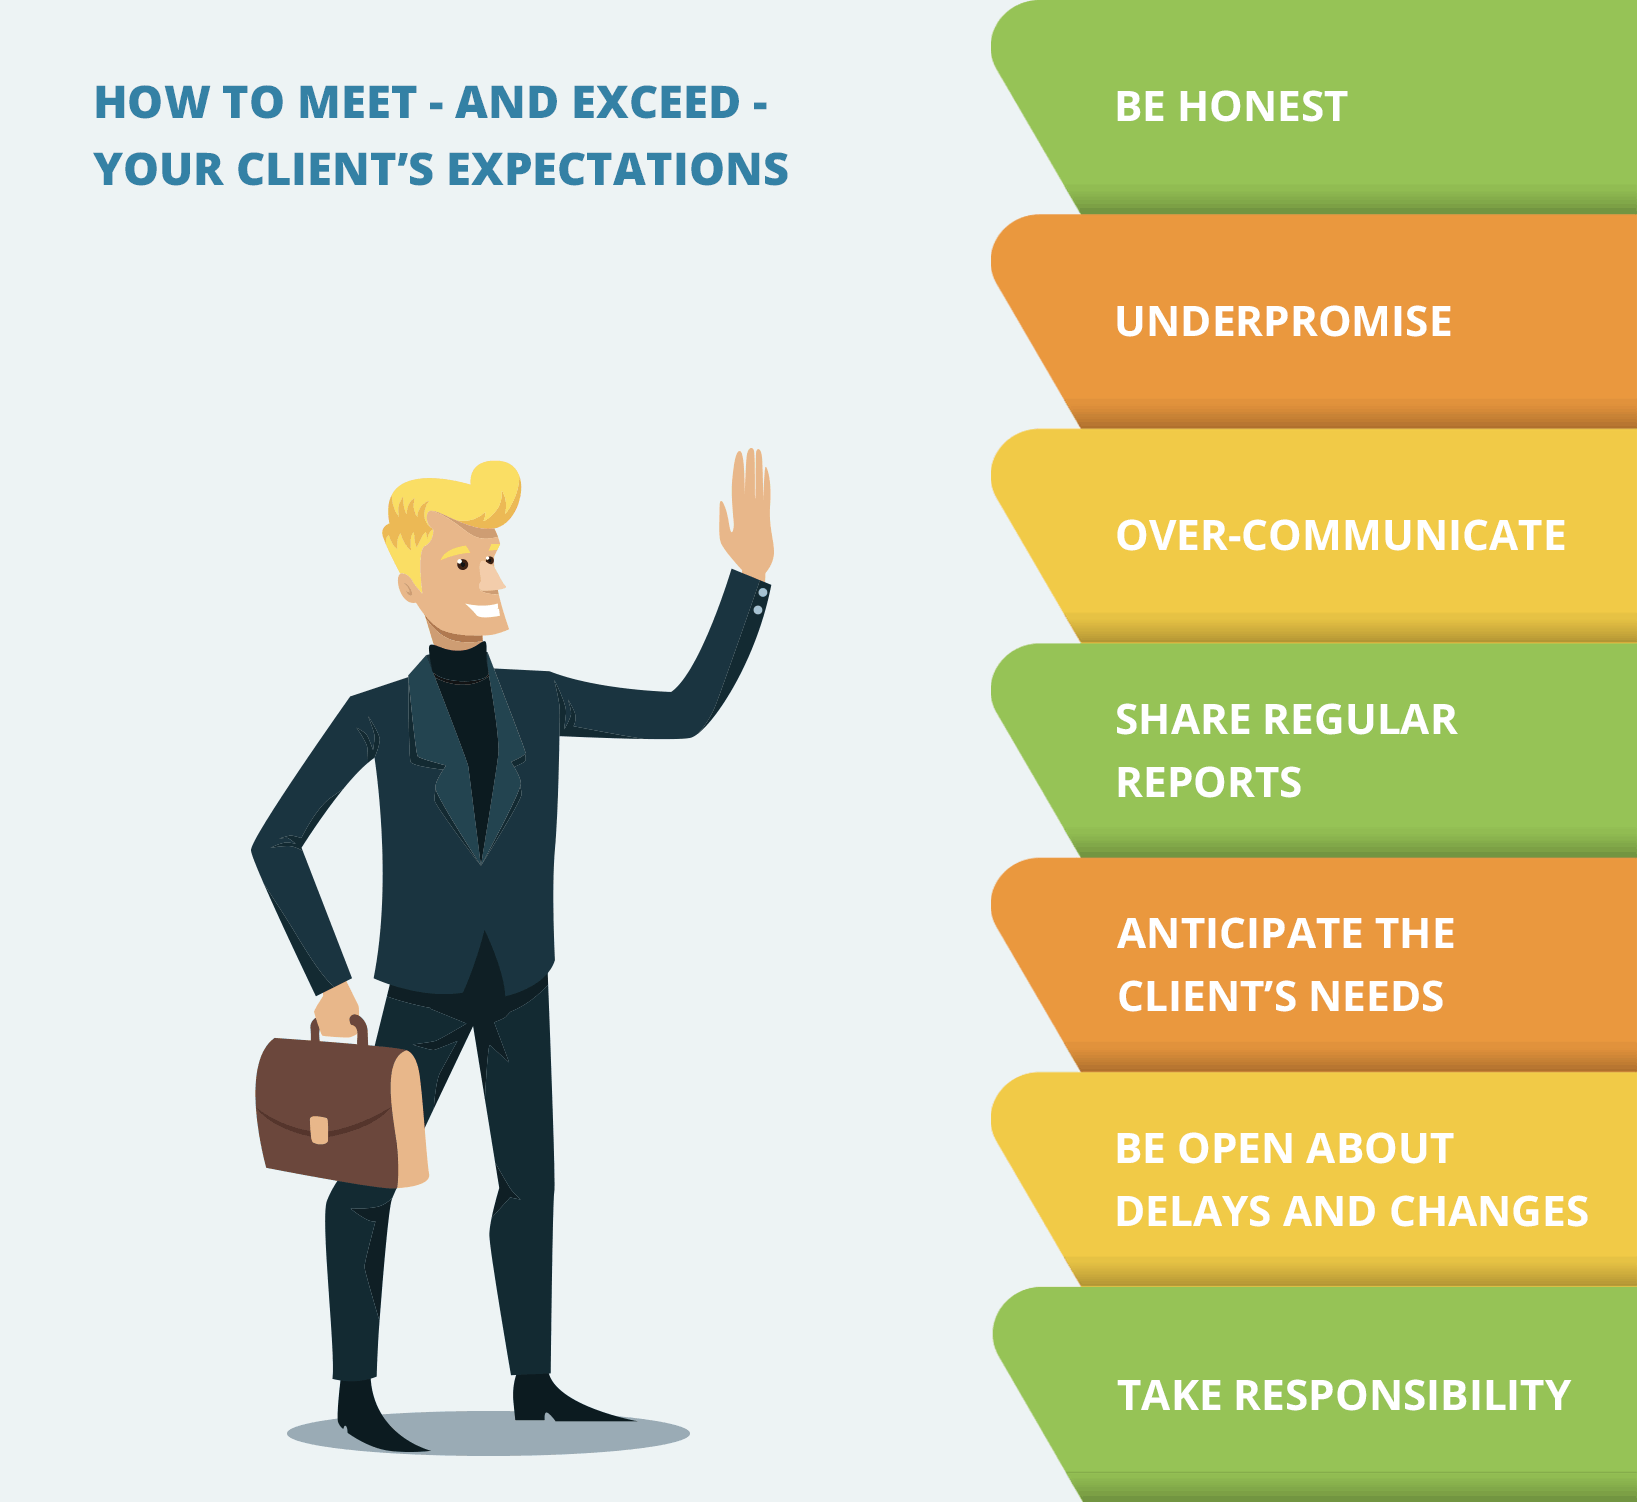 How to Meet - and Exceed - Your Client’s Expectations